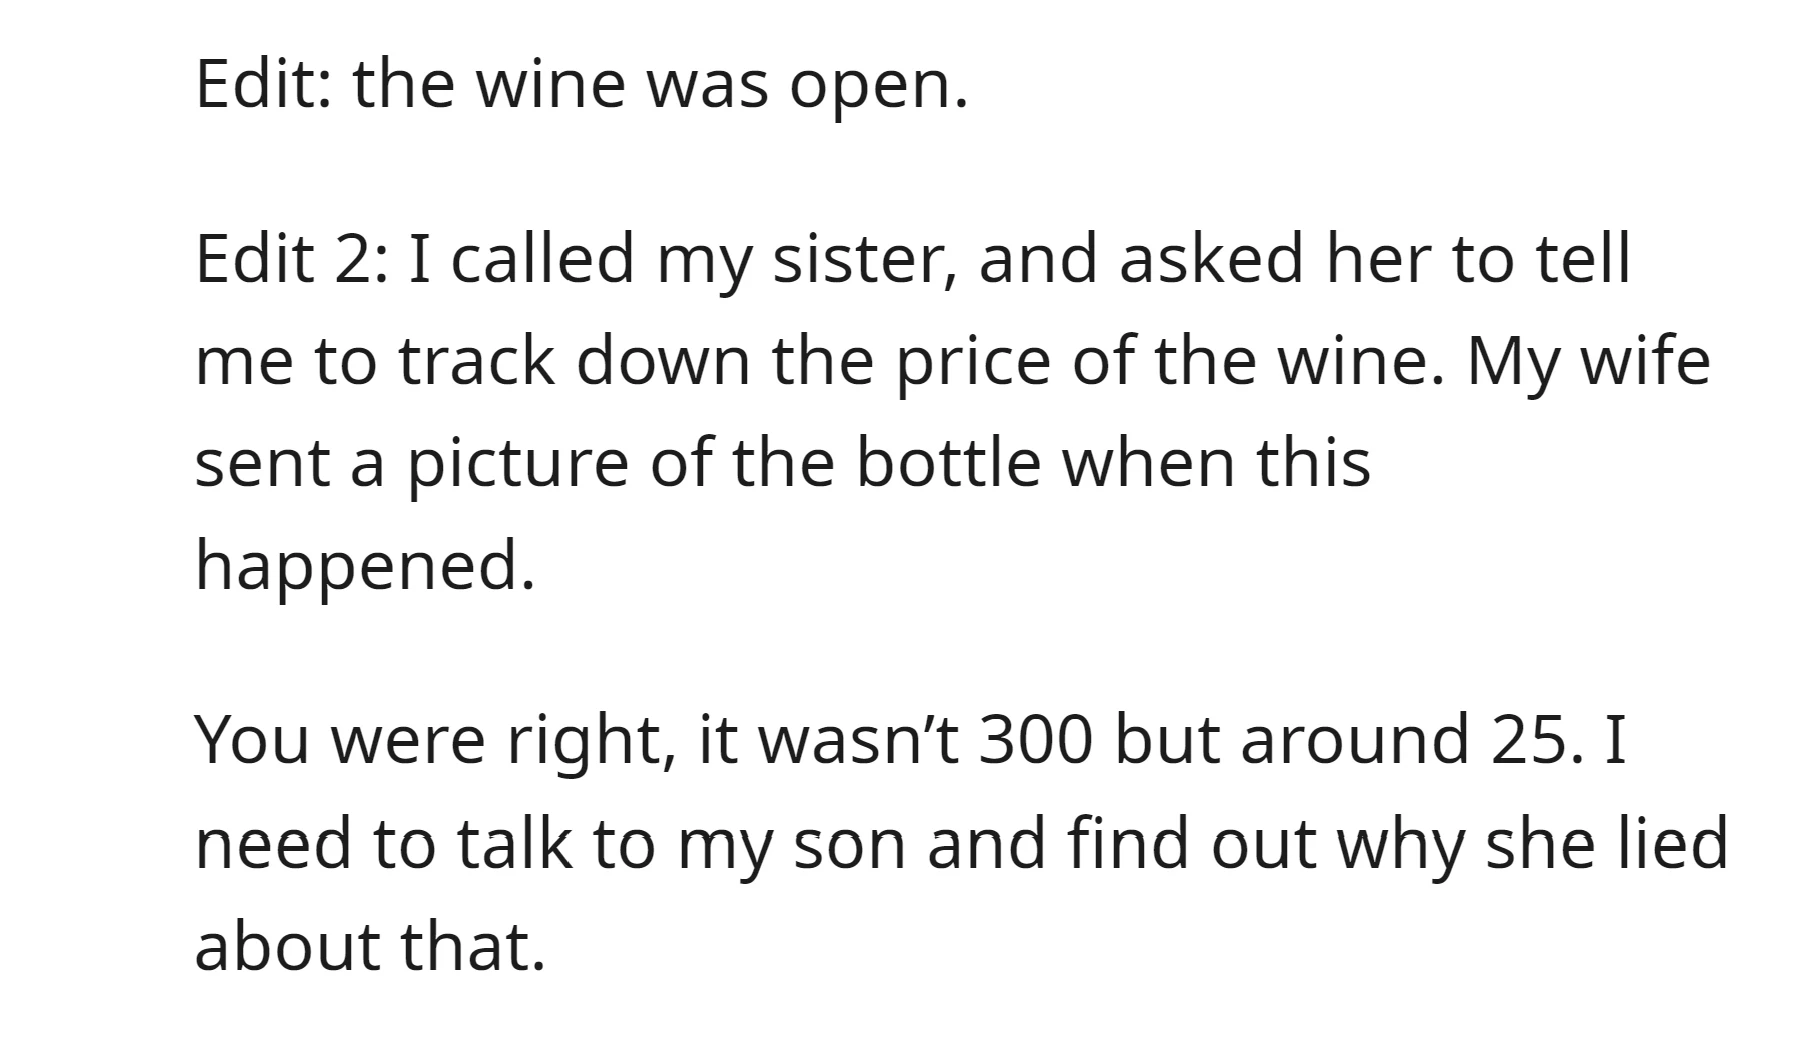 Edit 2: The Wine Is Not That Expensive